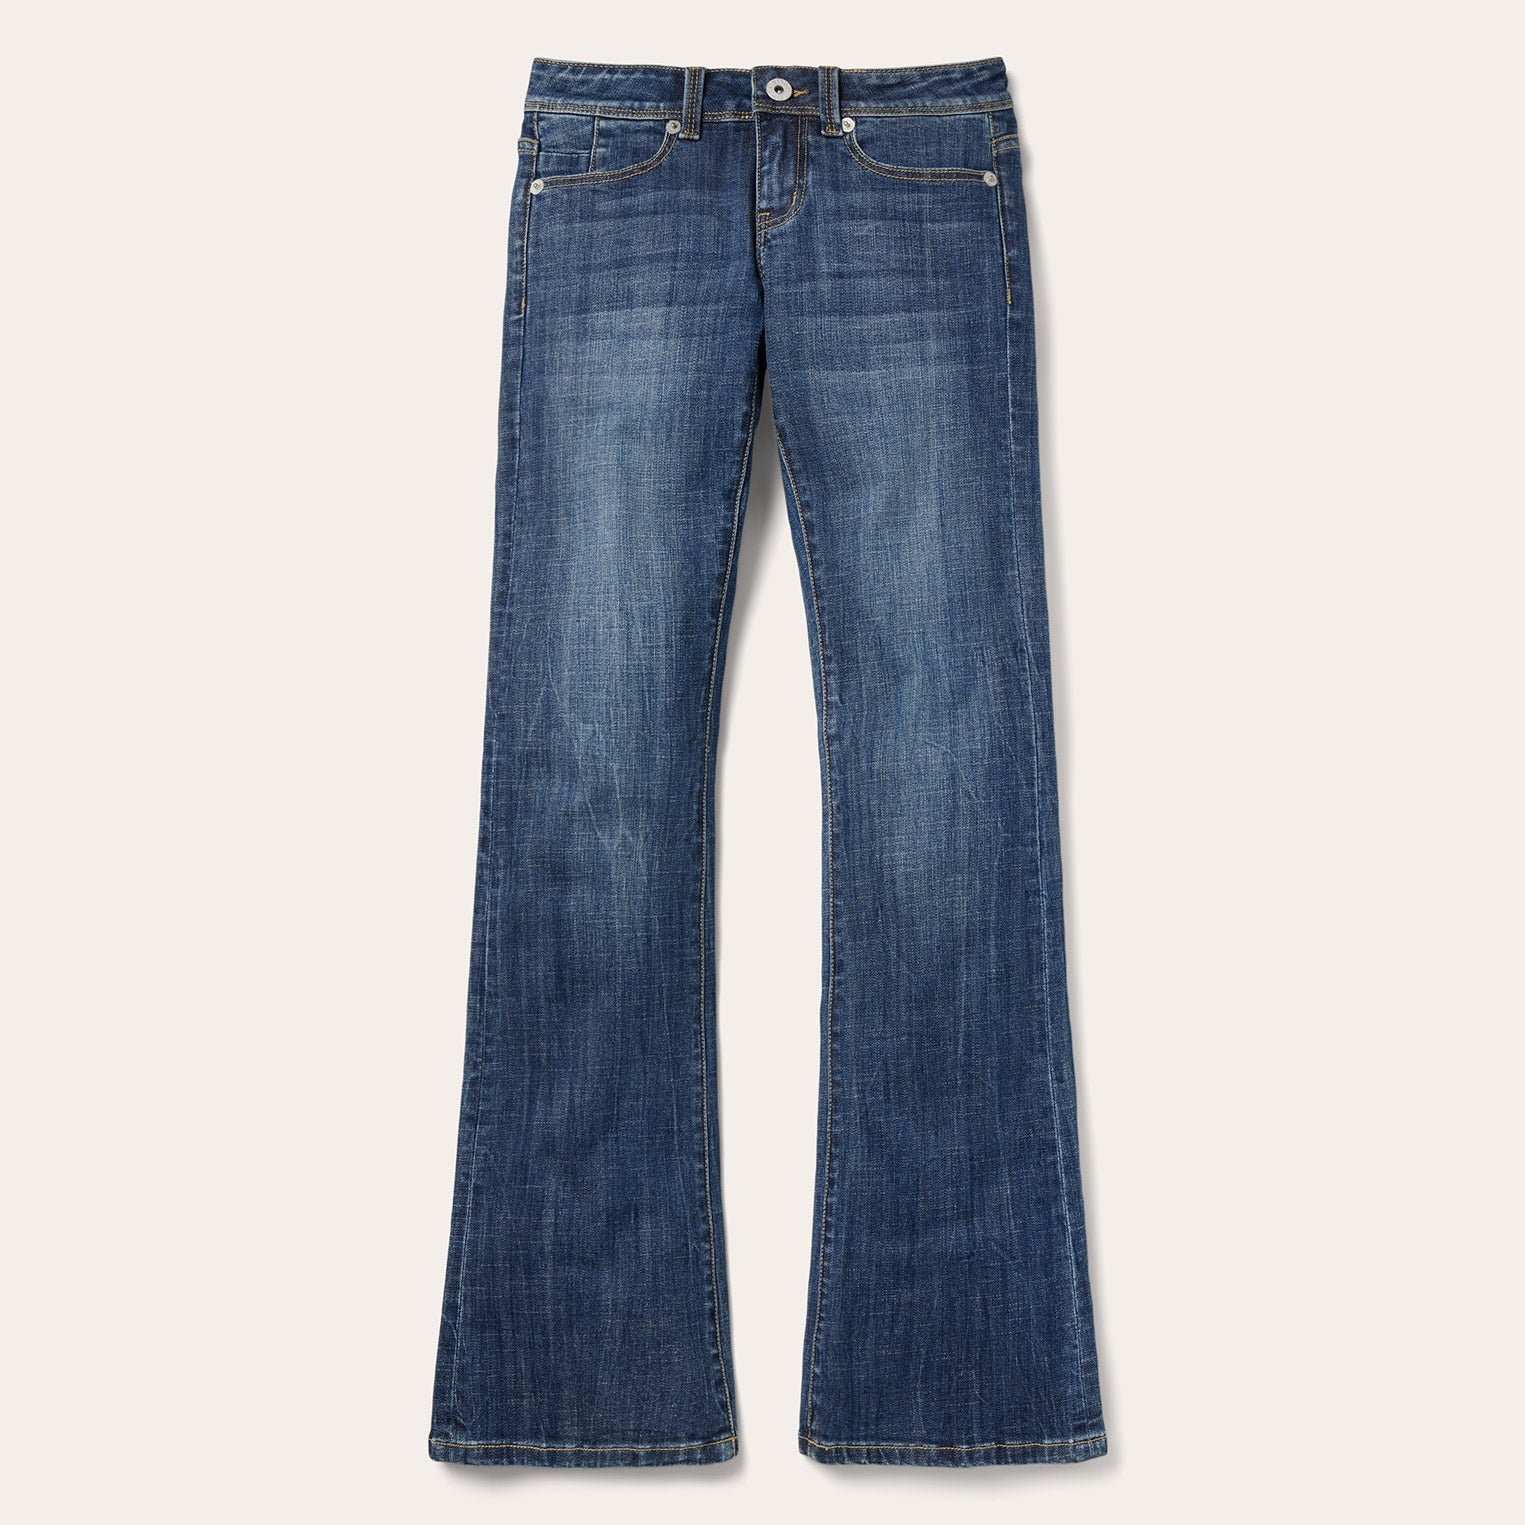 Stetson 816 Classic Bootcut Jeans